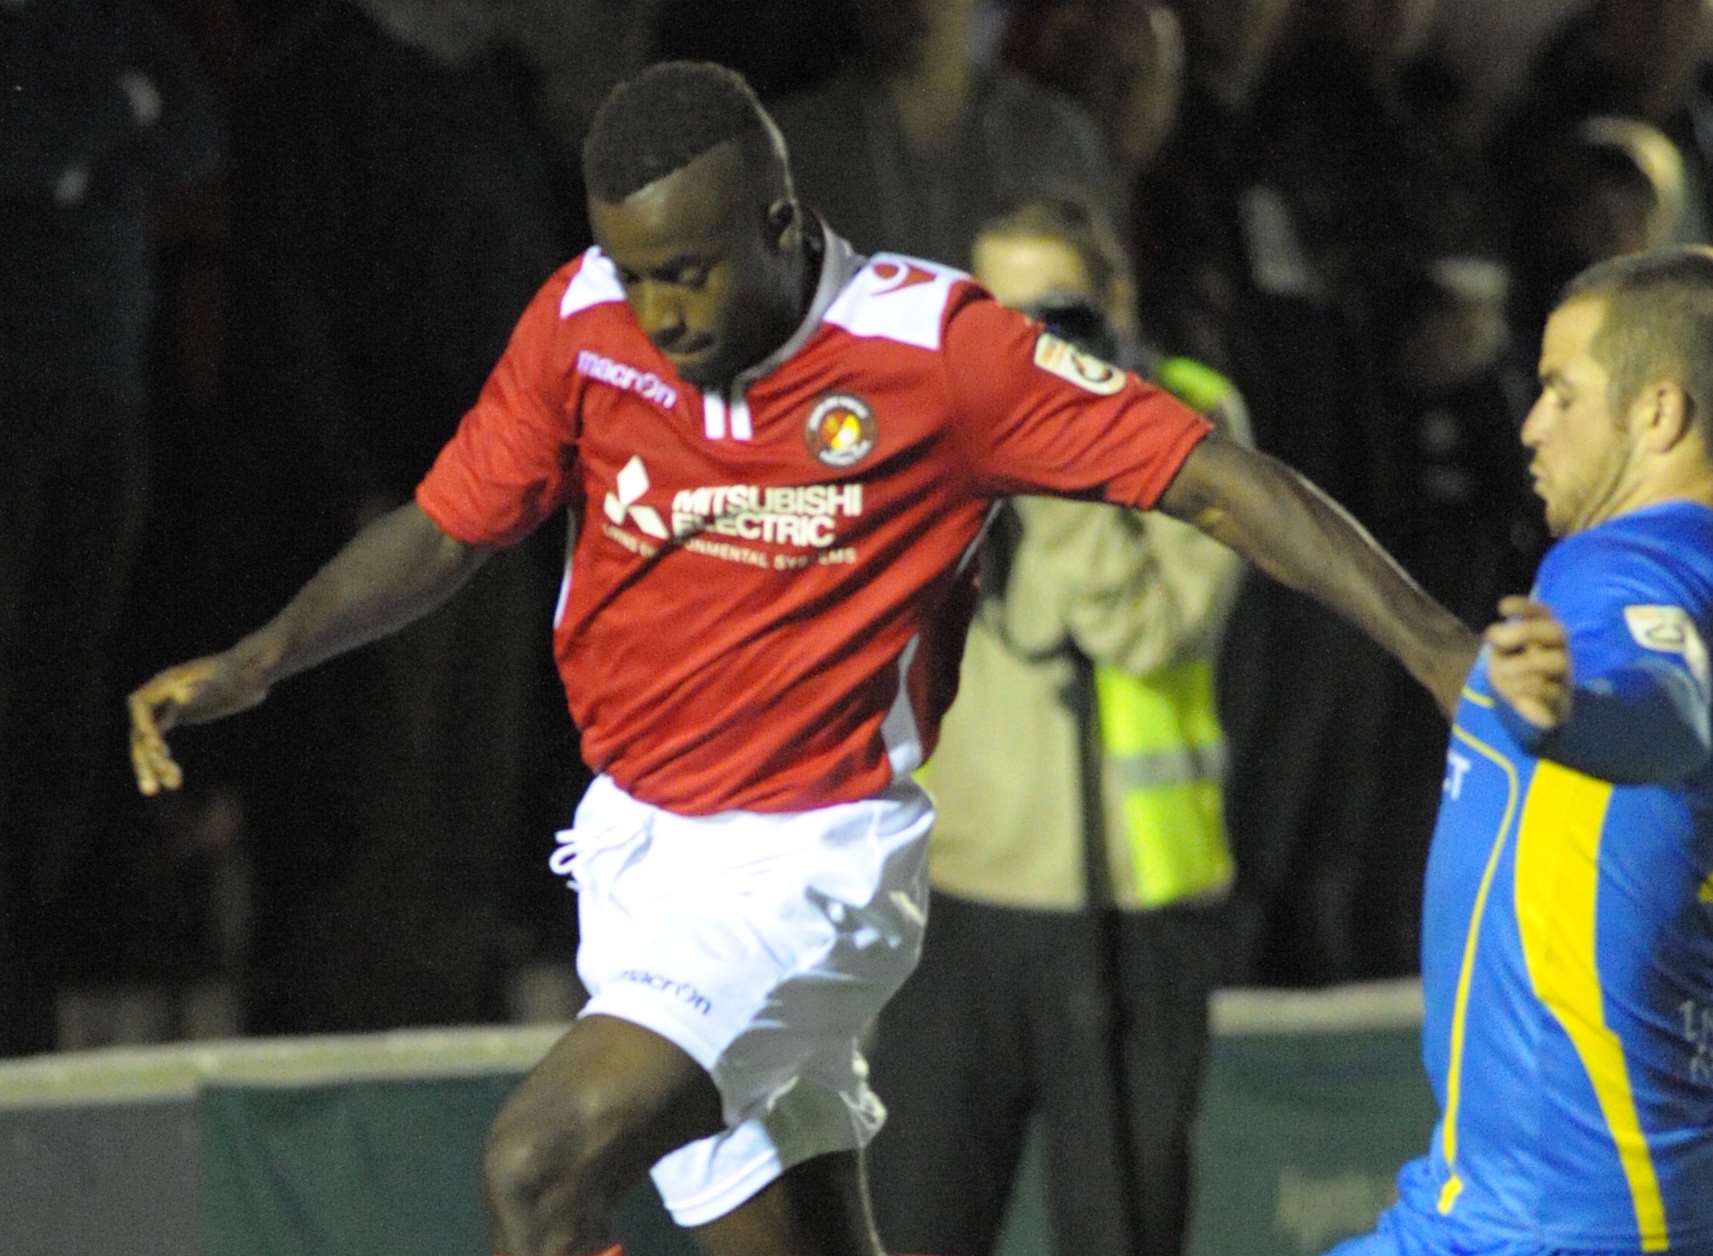 Chris Sessegnon looks to have played his last game for Ebbsfleet Picture: Steve Crispe